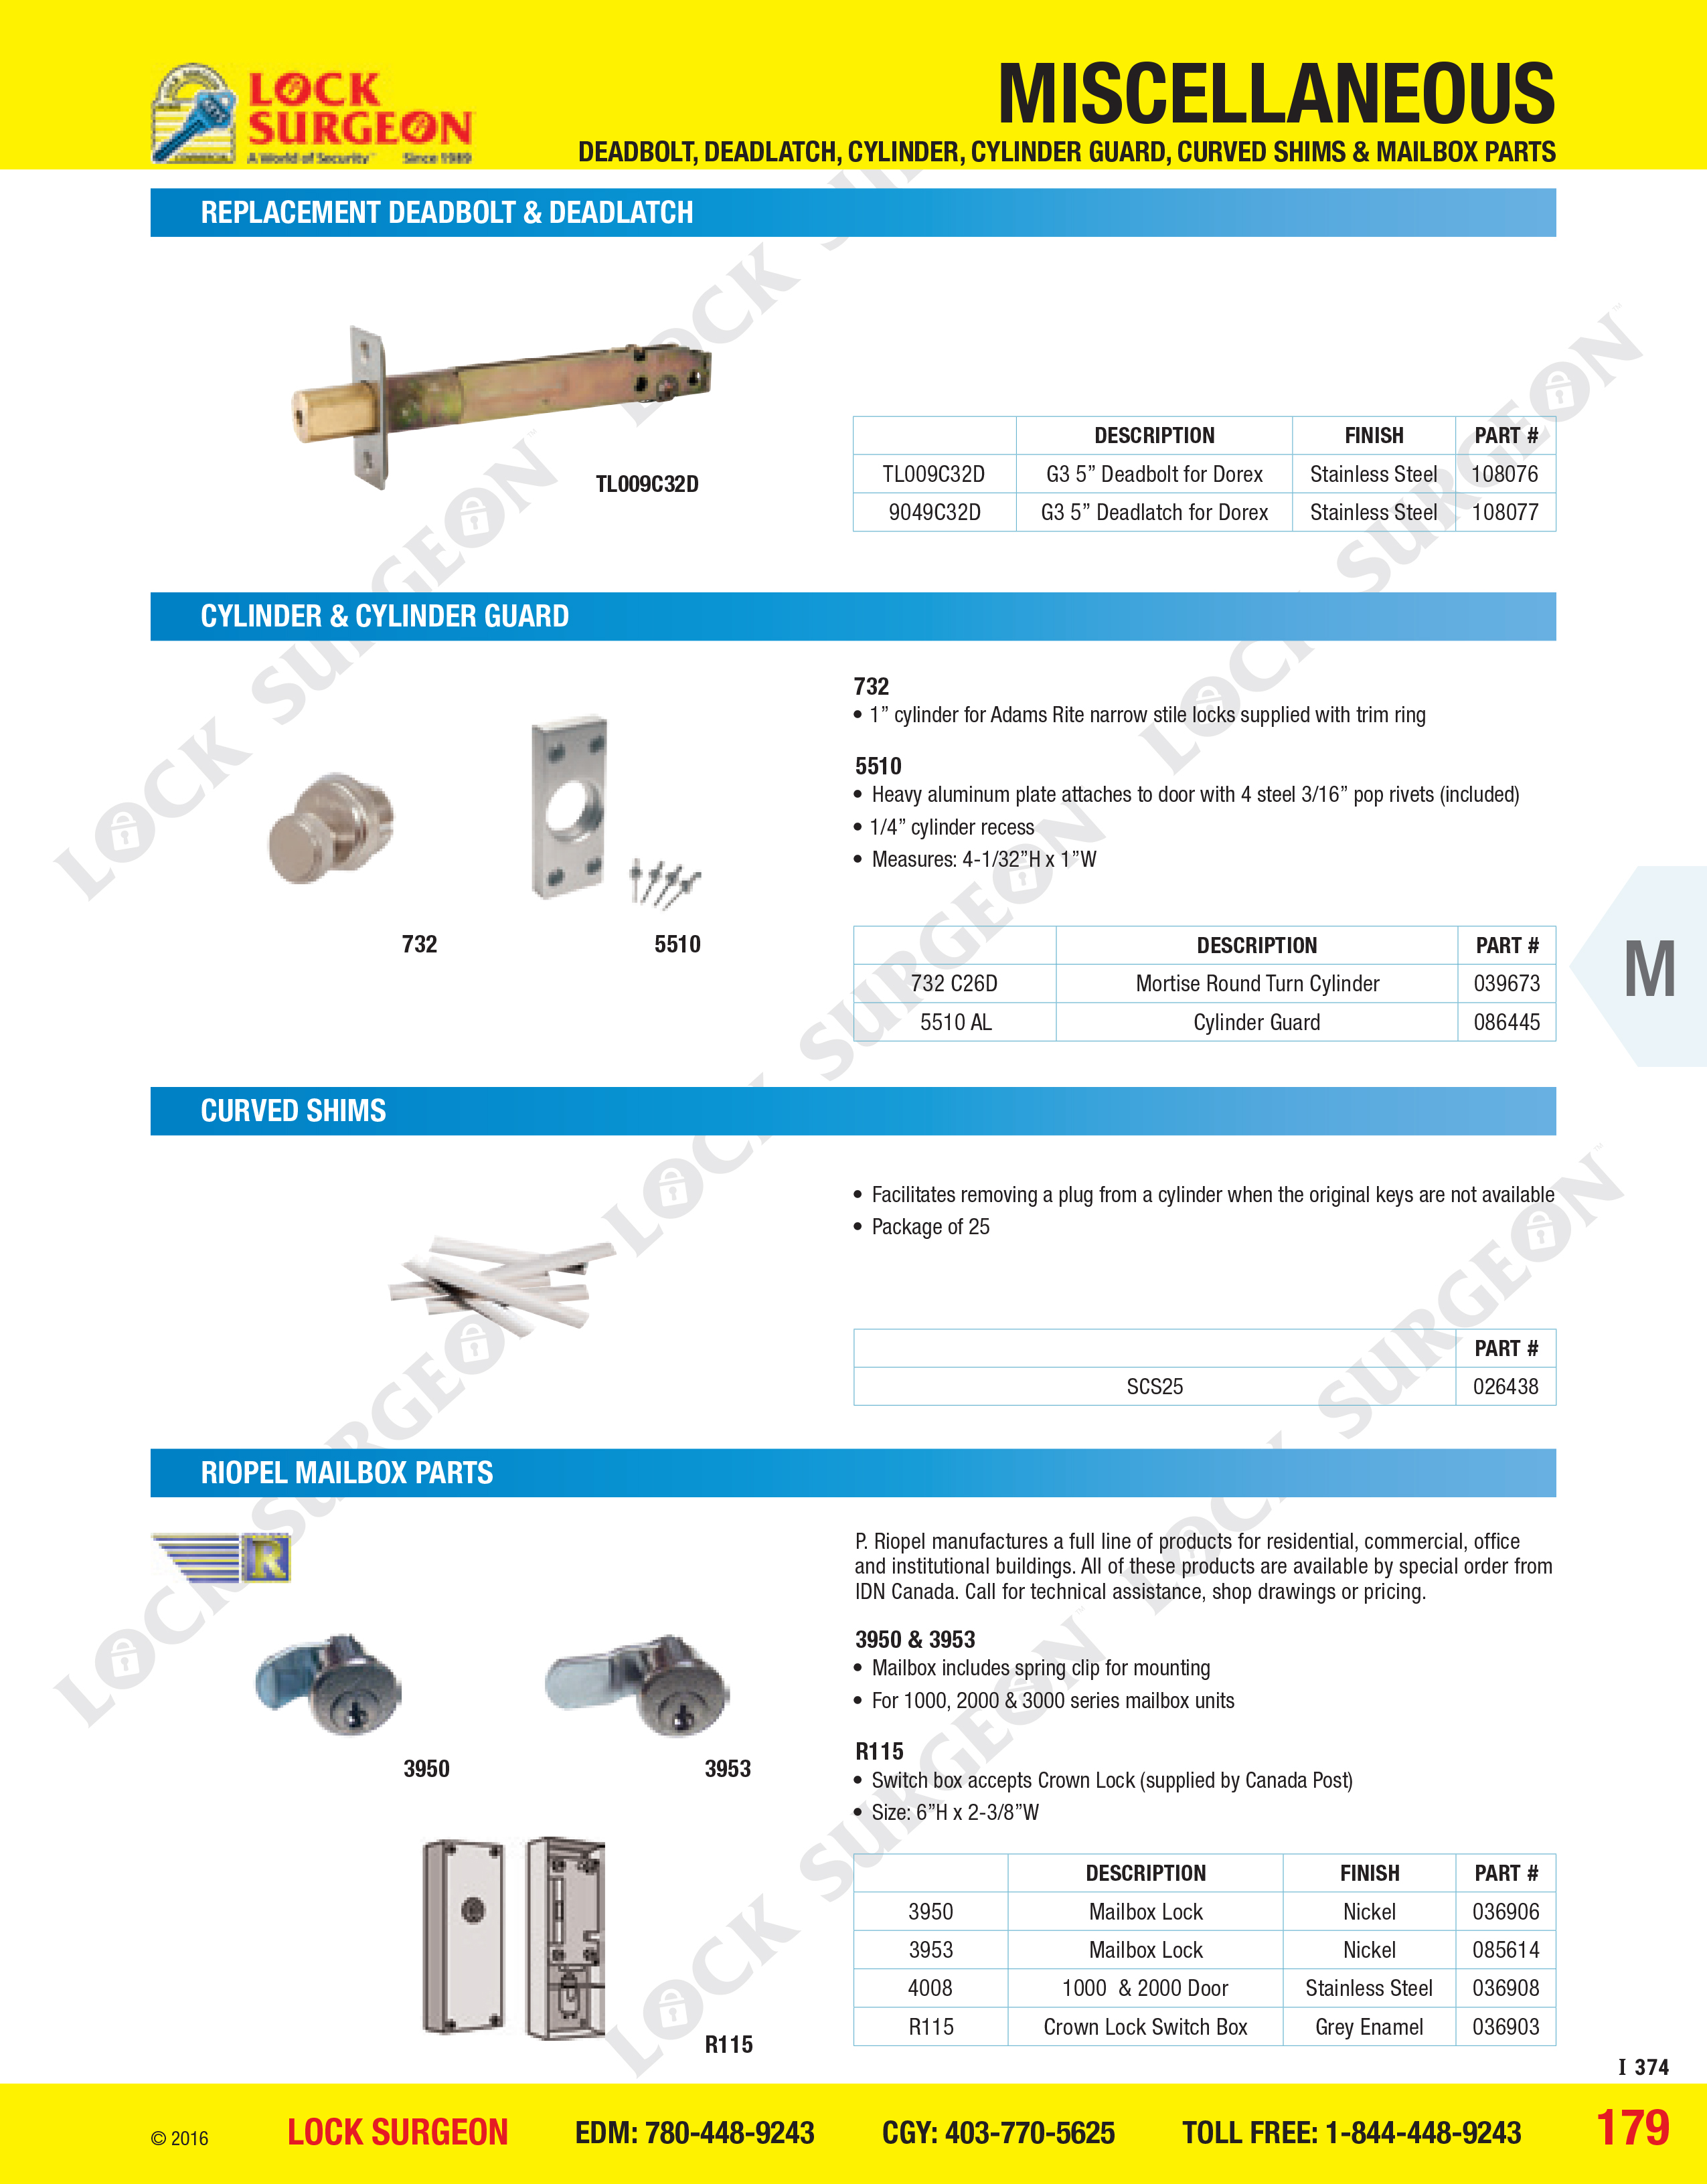 Miscellaneous Parts for Door Deadbolts, Deadlatchs, Cylinders, Cylinder Guards.